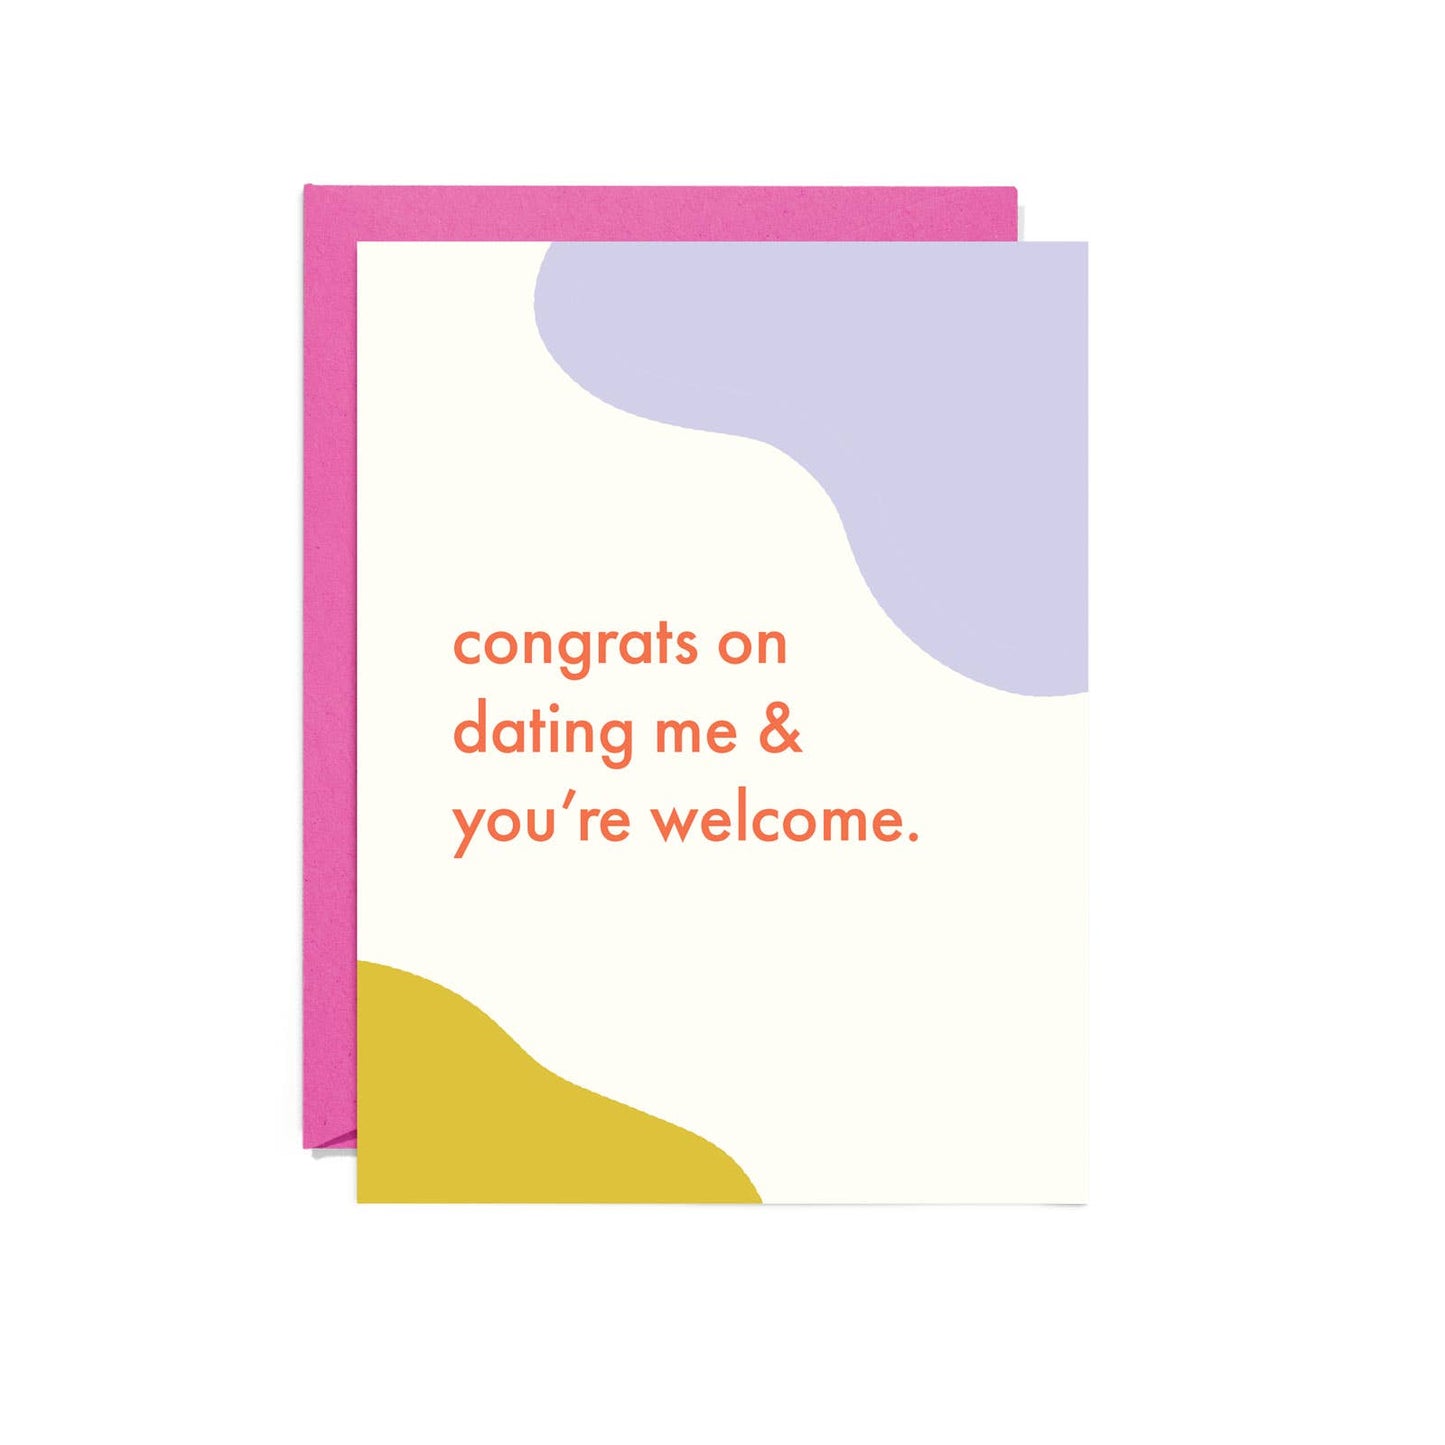 Party Mountain Paper co. - Congrats on Dating Me | Love & Valentine's Card